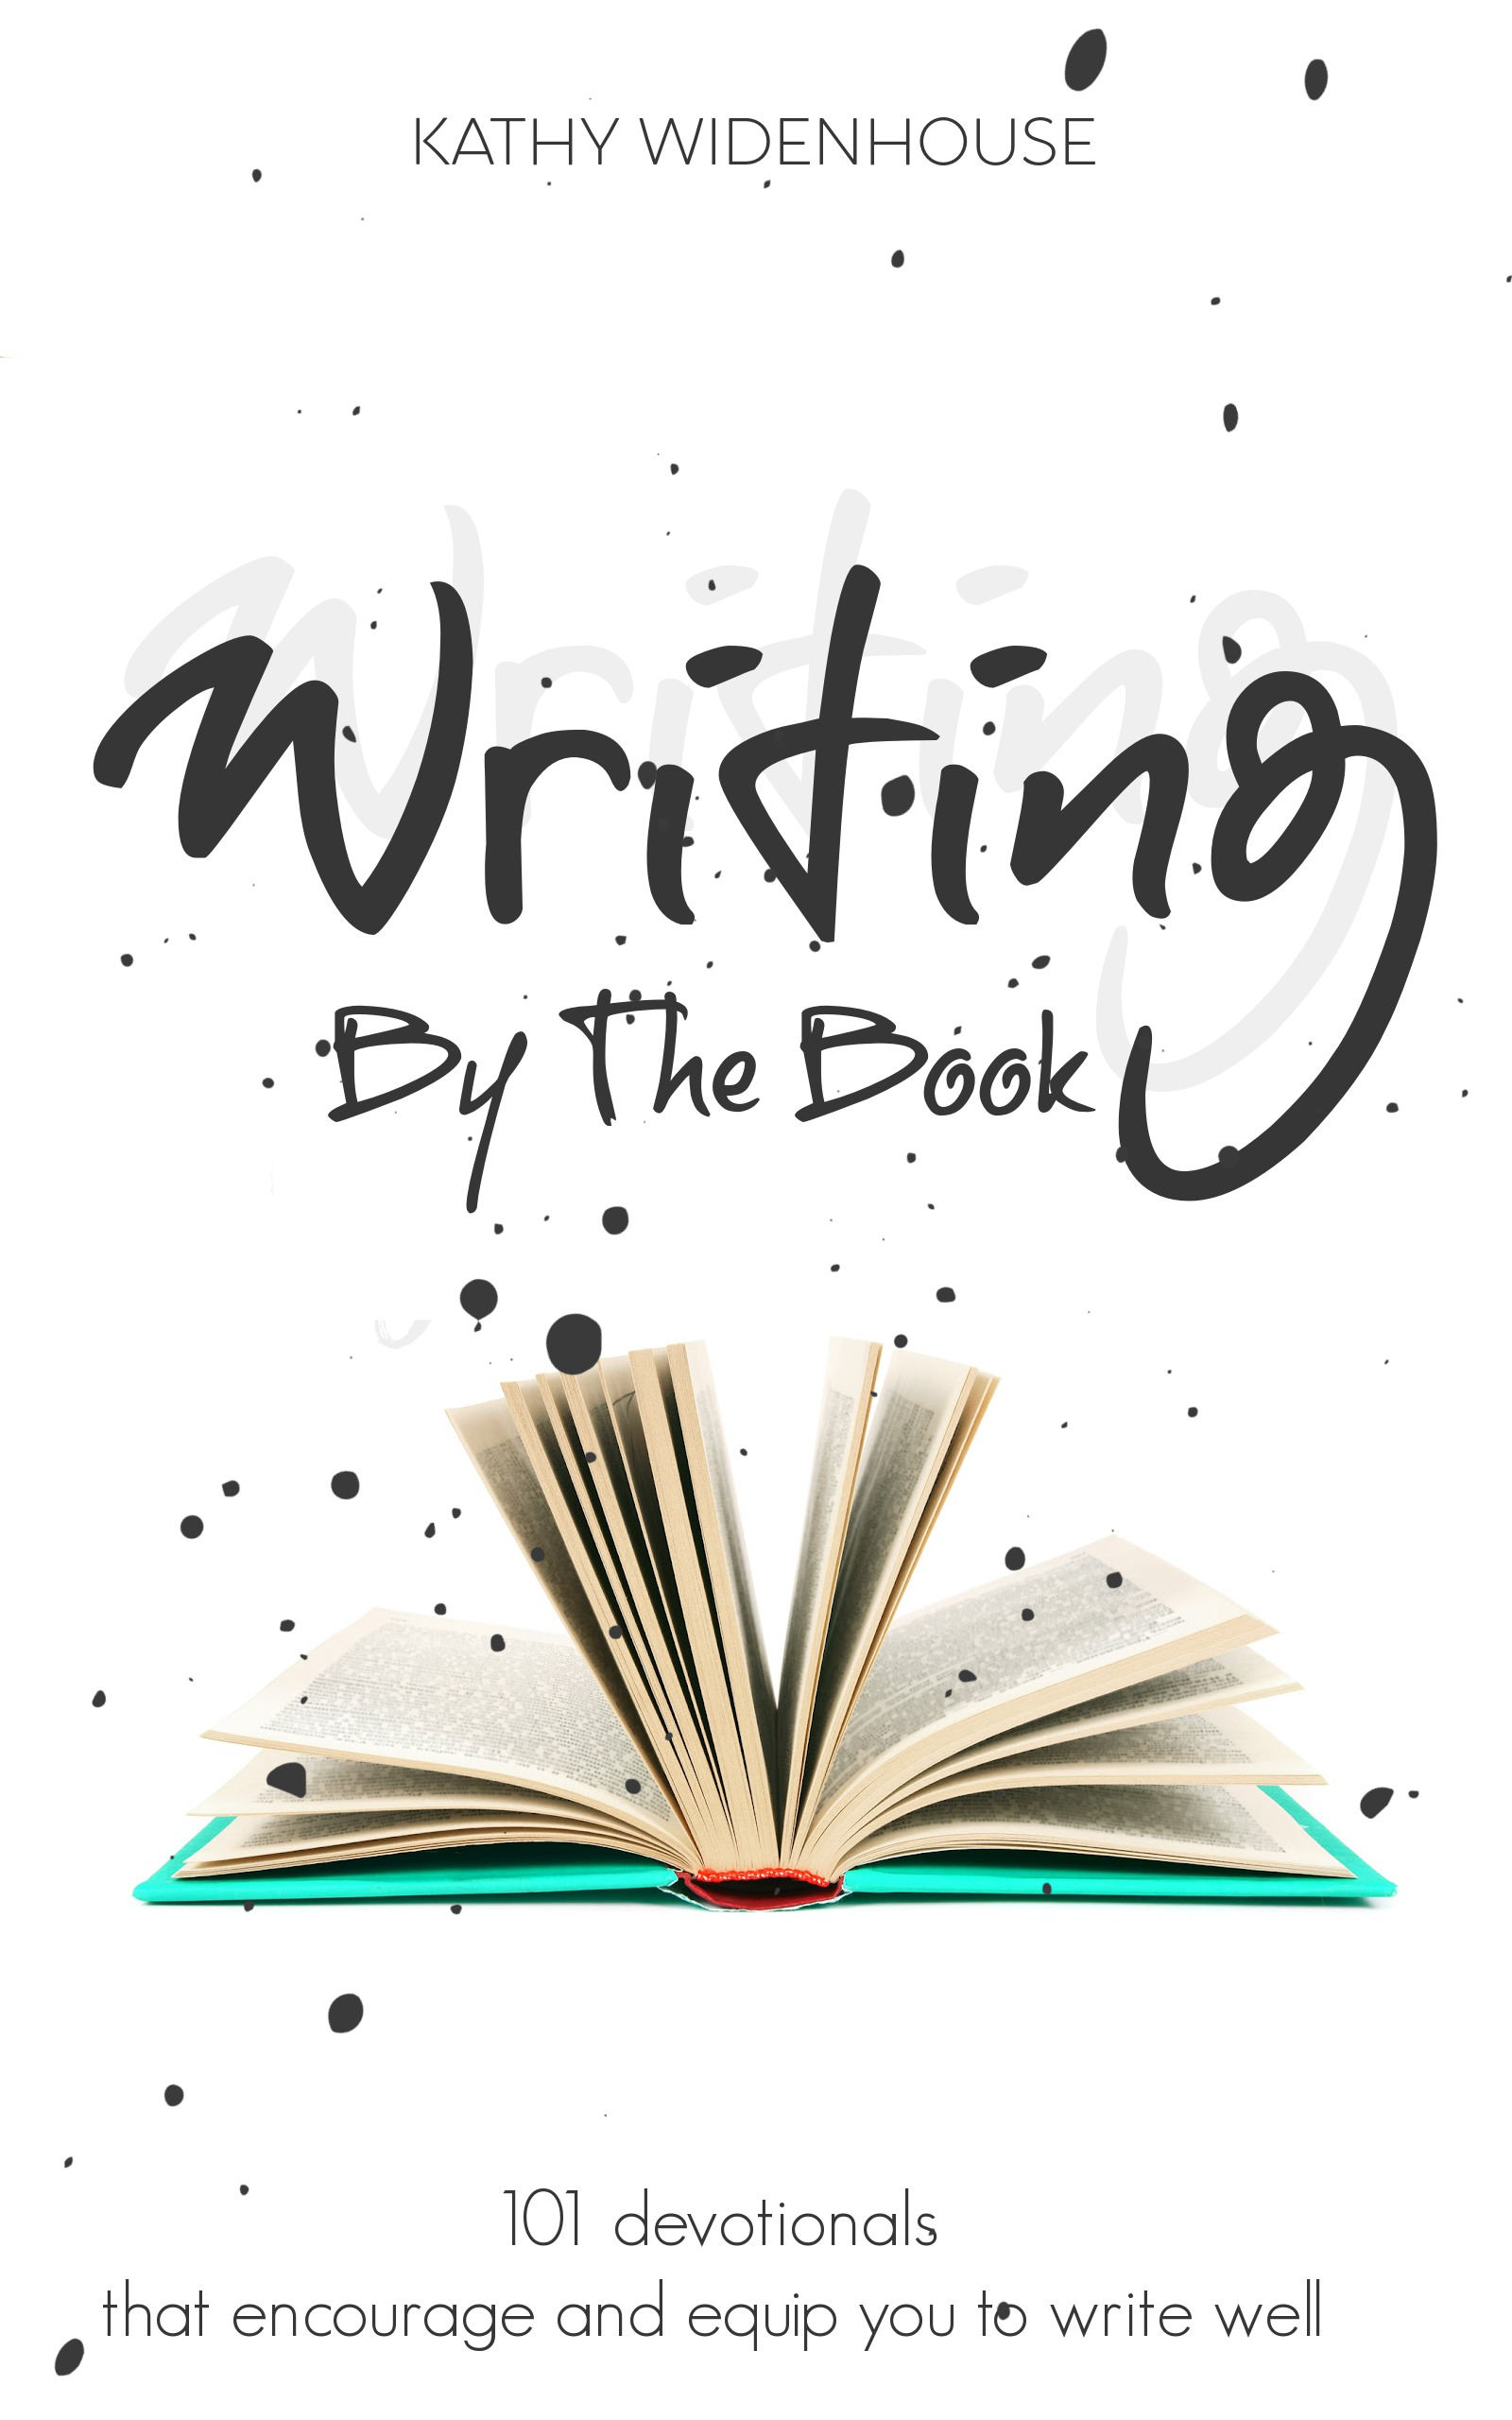 Writing By The Book: 101 devotionals for writers by Kathy Widenhouse with Word Wise at Nonprofit Copywriter